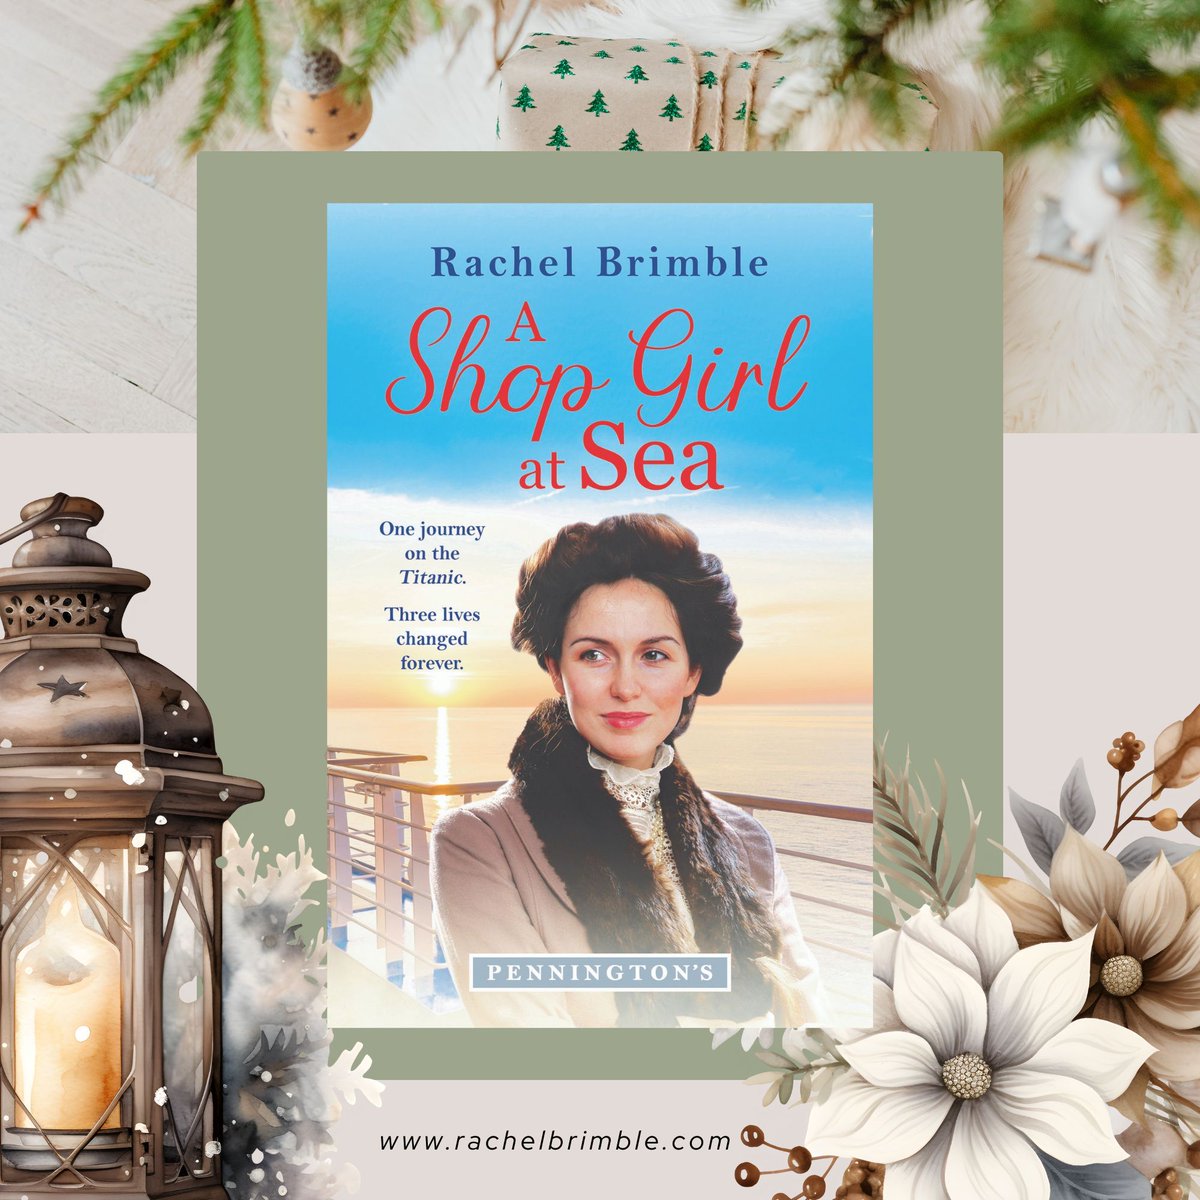 An opportunity for adventure...
The most beautiful ship in the world...
A moment that will change her life forever...
'A real page turner - an emotional, action-packed read...' Splashes Into Books
#historicalfictionbookshelf #historicalreads #titanic
BUY: buff.ly/3F5lEeK